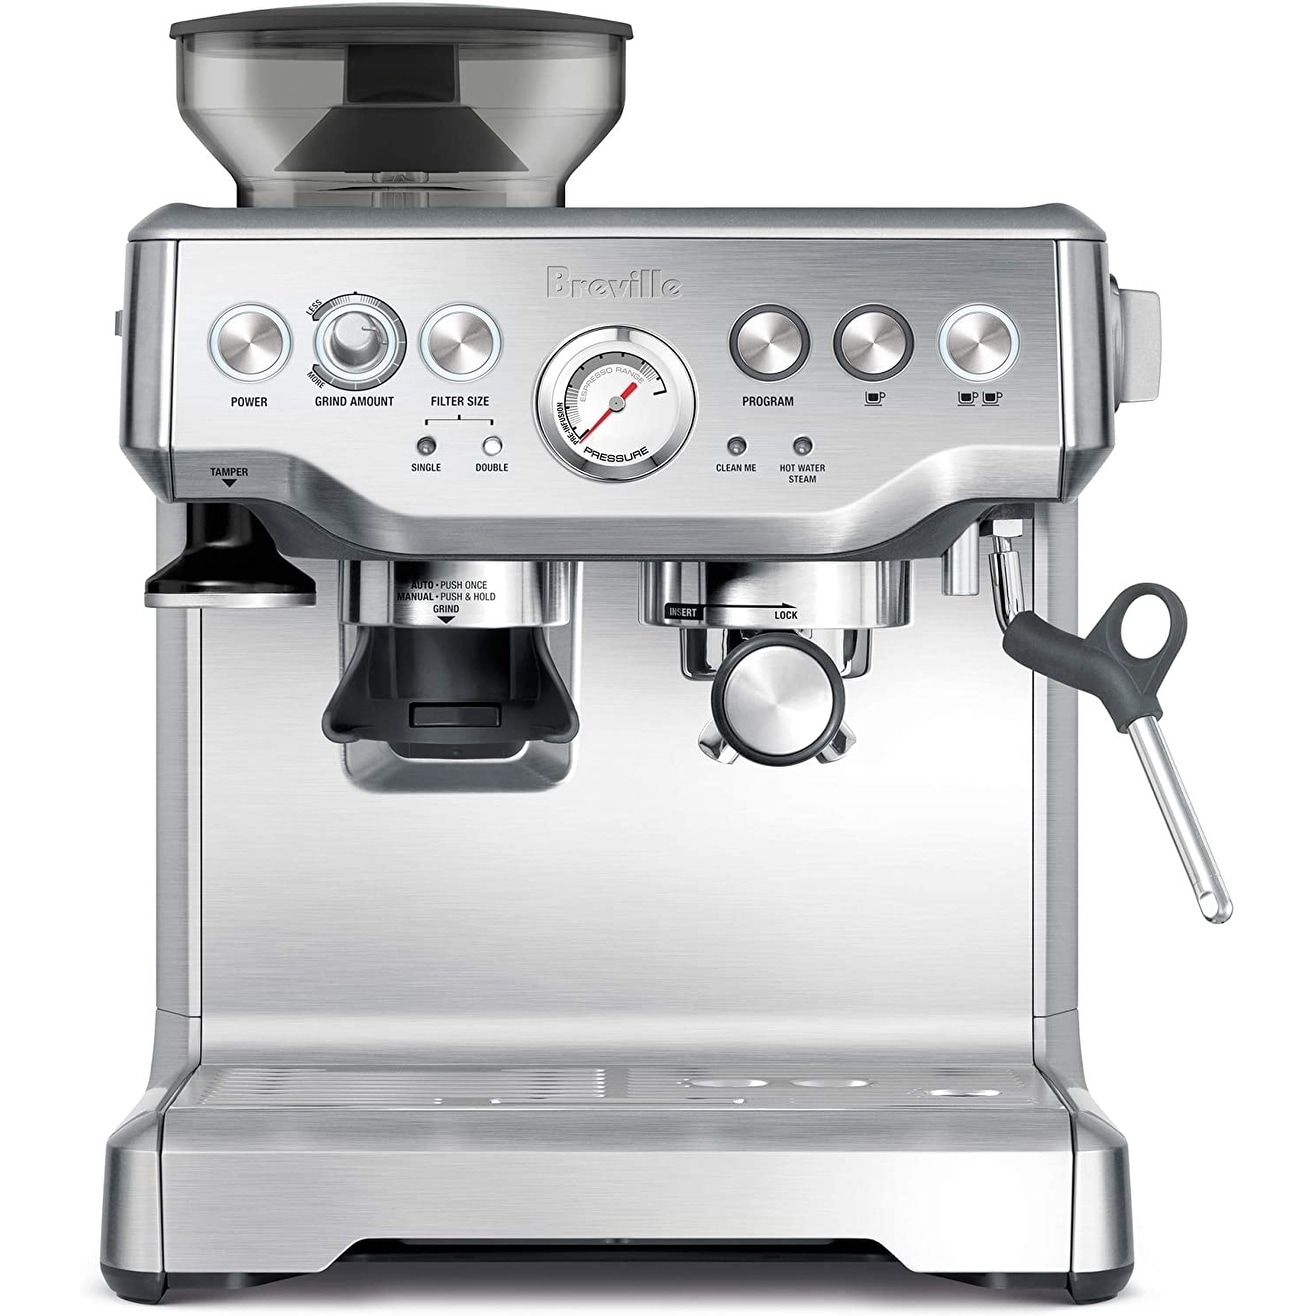 https://ak1.ostkcdn.com/images/products/is/images/direct/a5e221994d91a2fc31e5343eea167b03e5ee5e60/Breville-Barista-Express-Espresso-Machine---Stainless-Steel.jpg